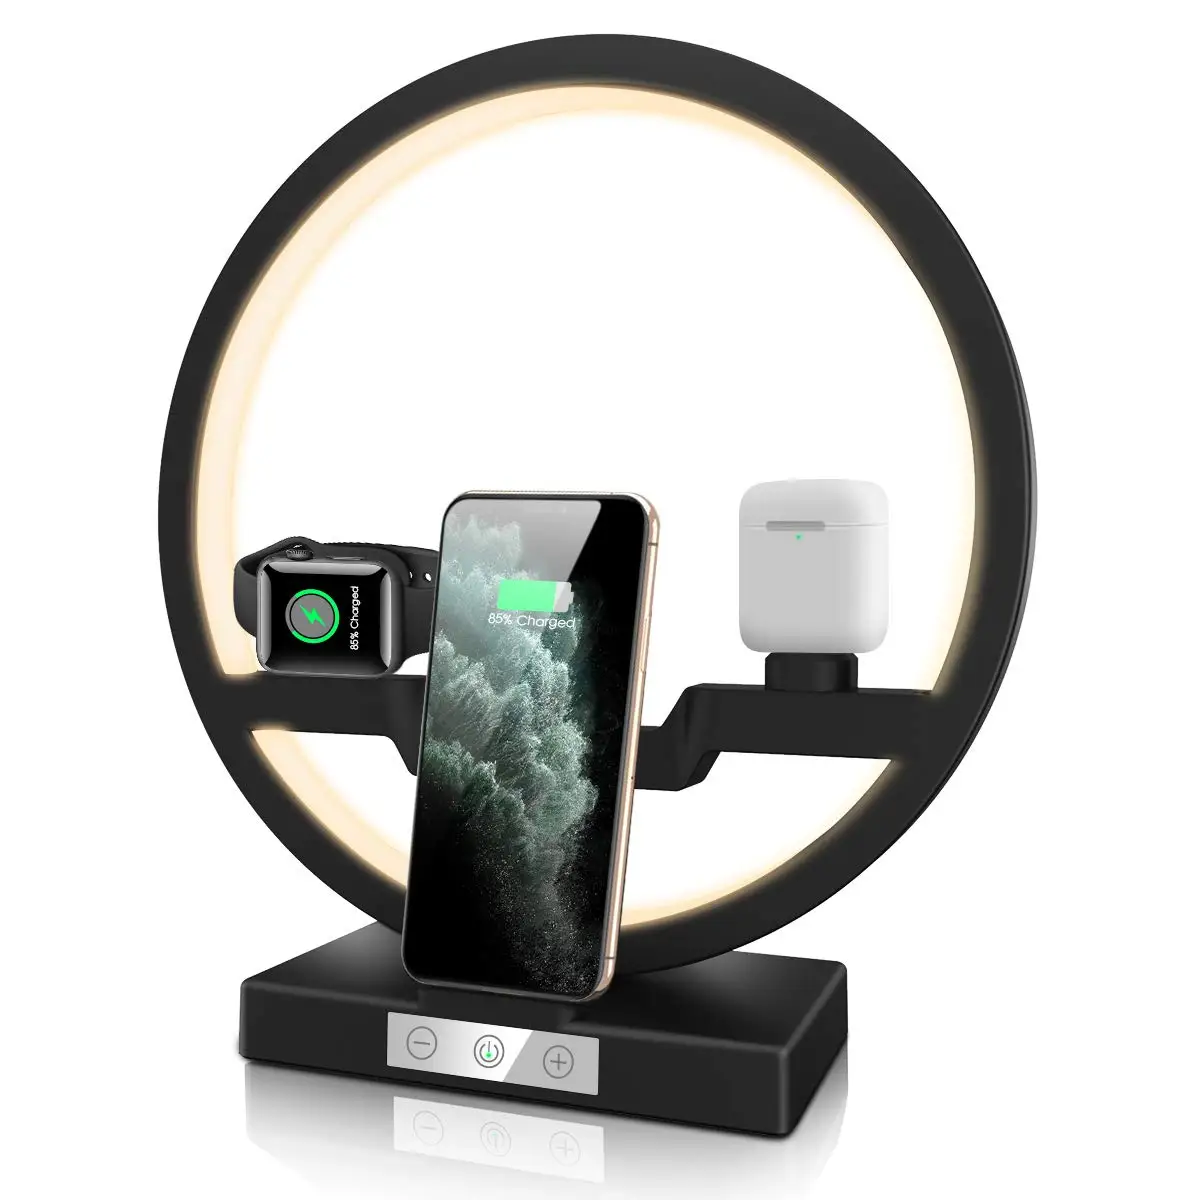 3 in 1 Wireless Charger Charging for iPhone 11,Apple Watch,Wireless Charging with LED Night Ligh